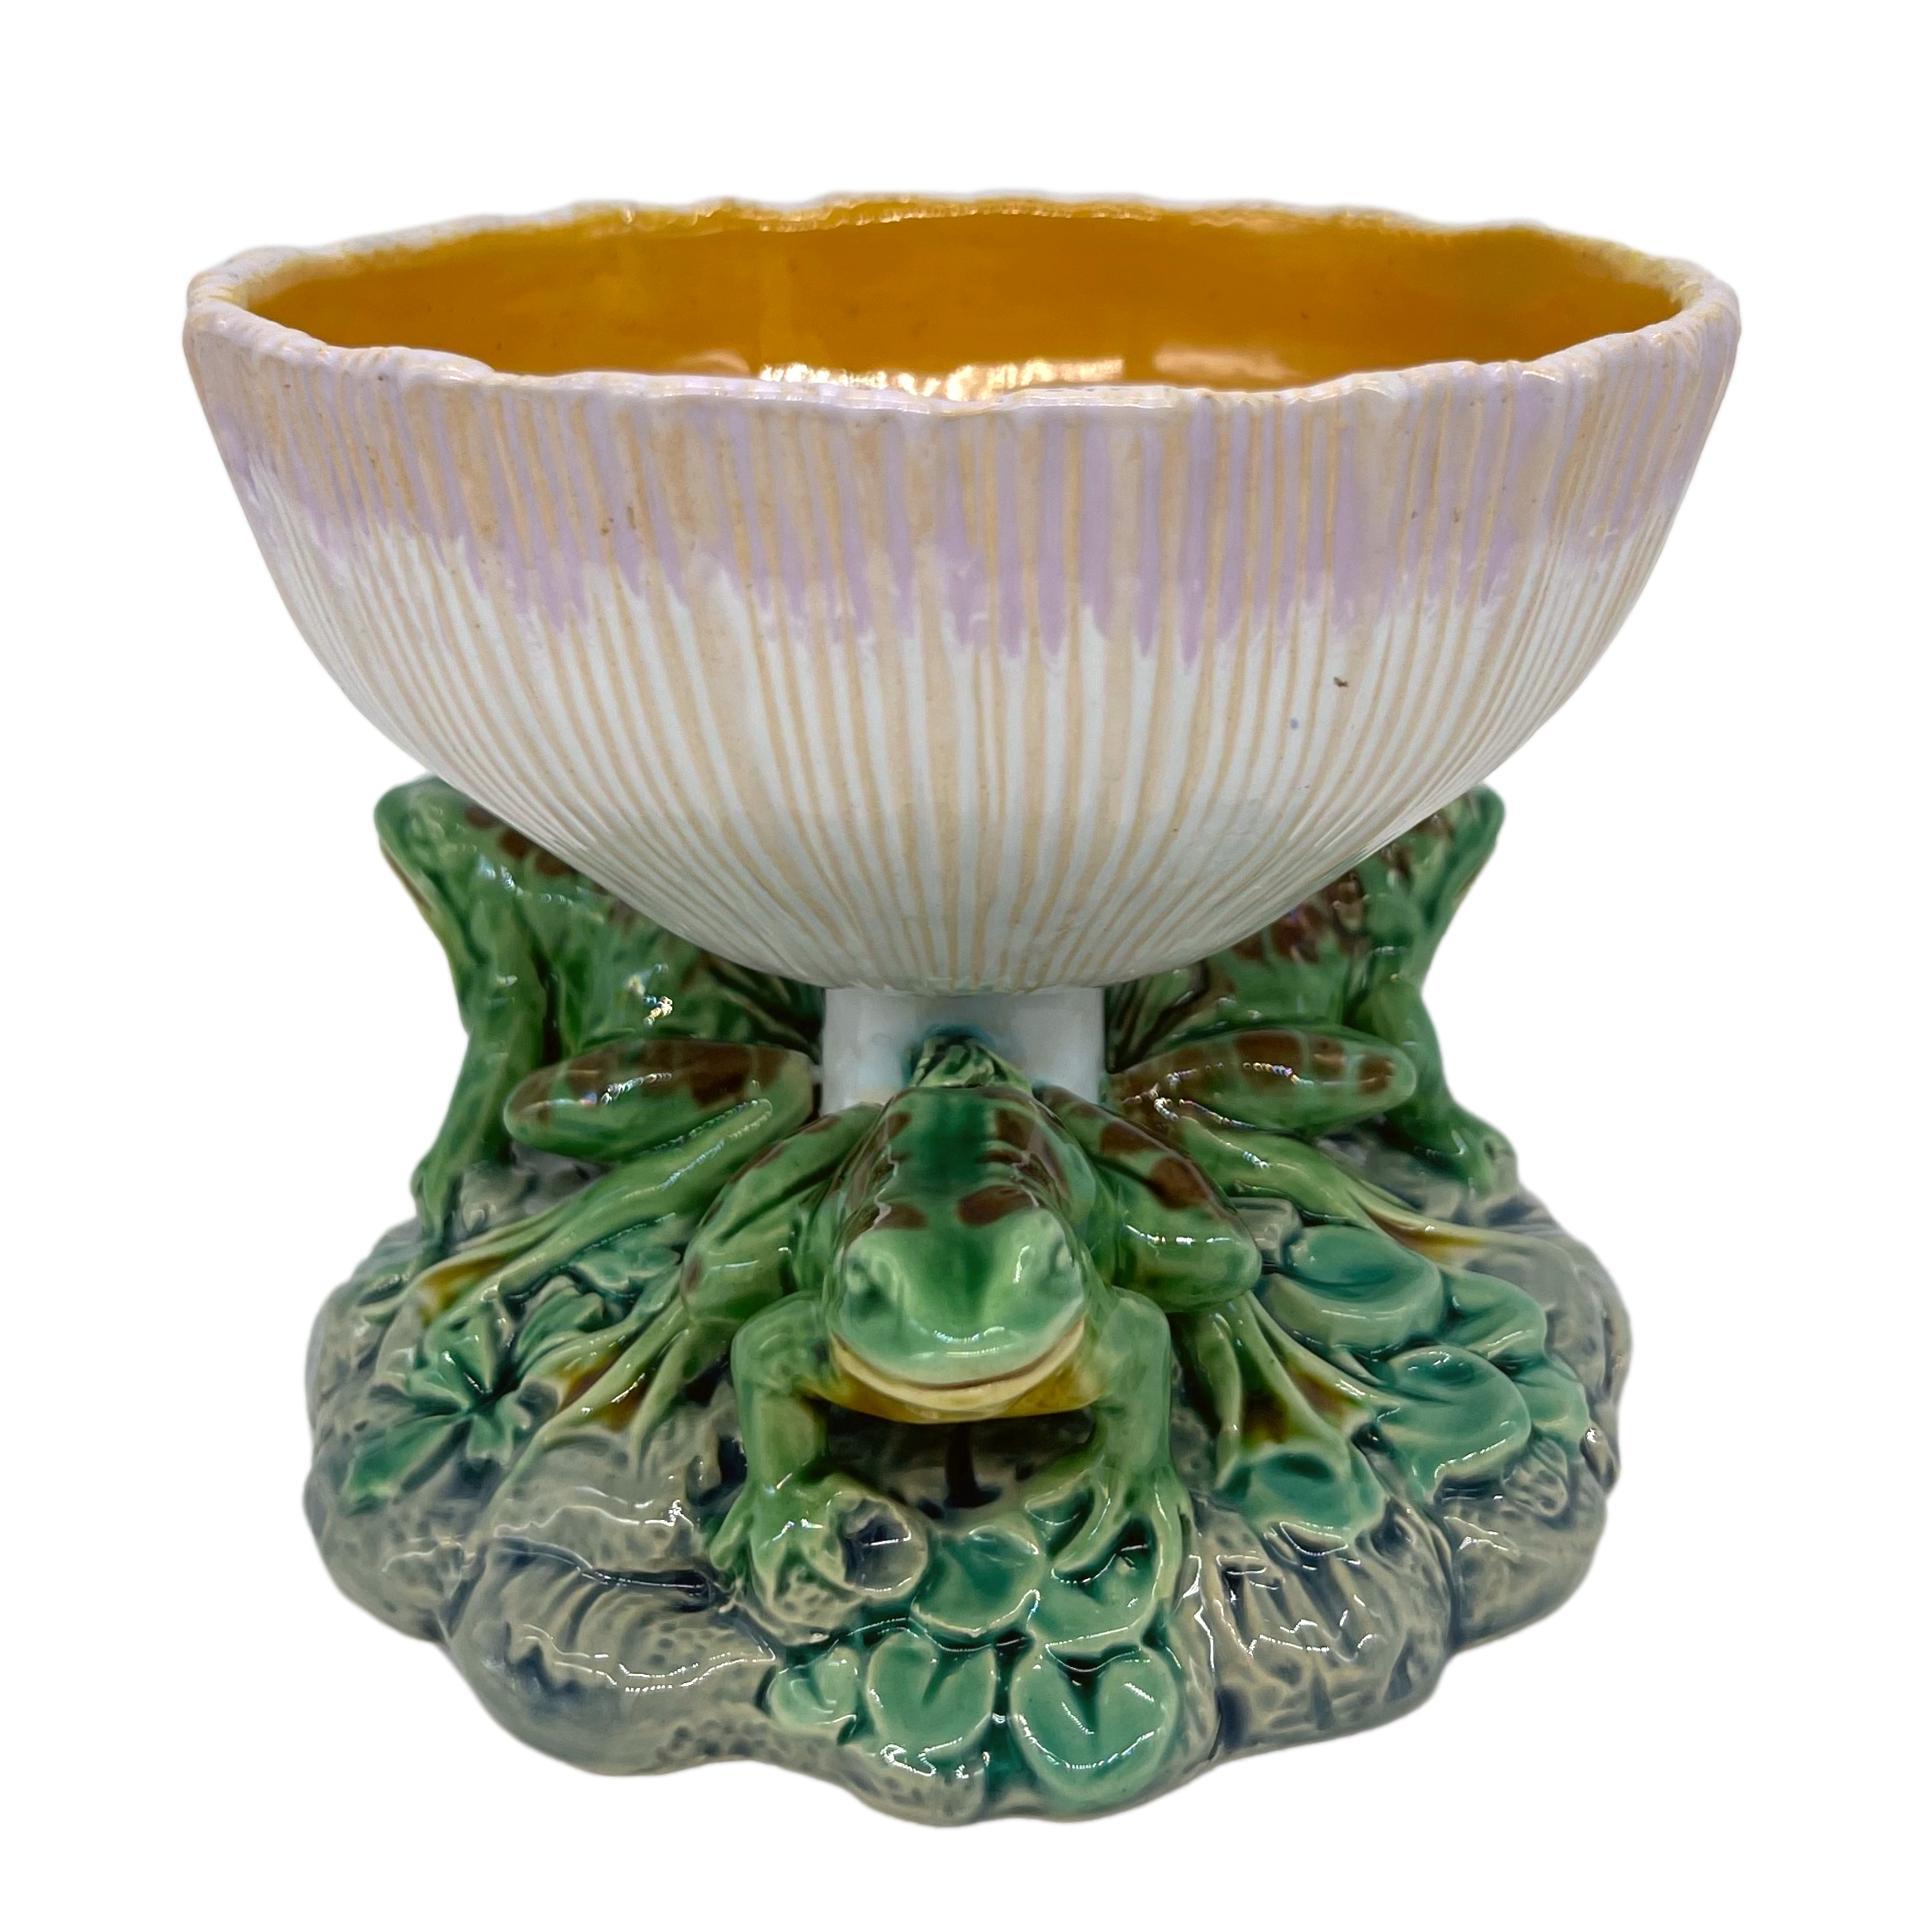 Molded Minton Majolica Mushroom Tazza with Three-Frog Base, English, Dated 1868 For Sale